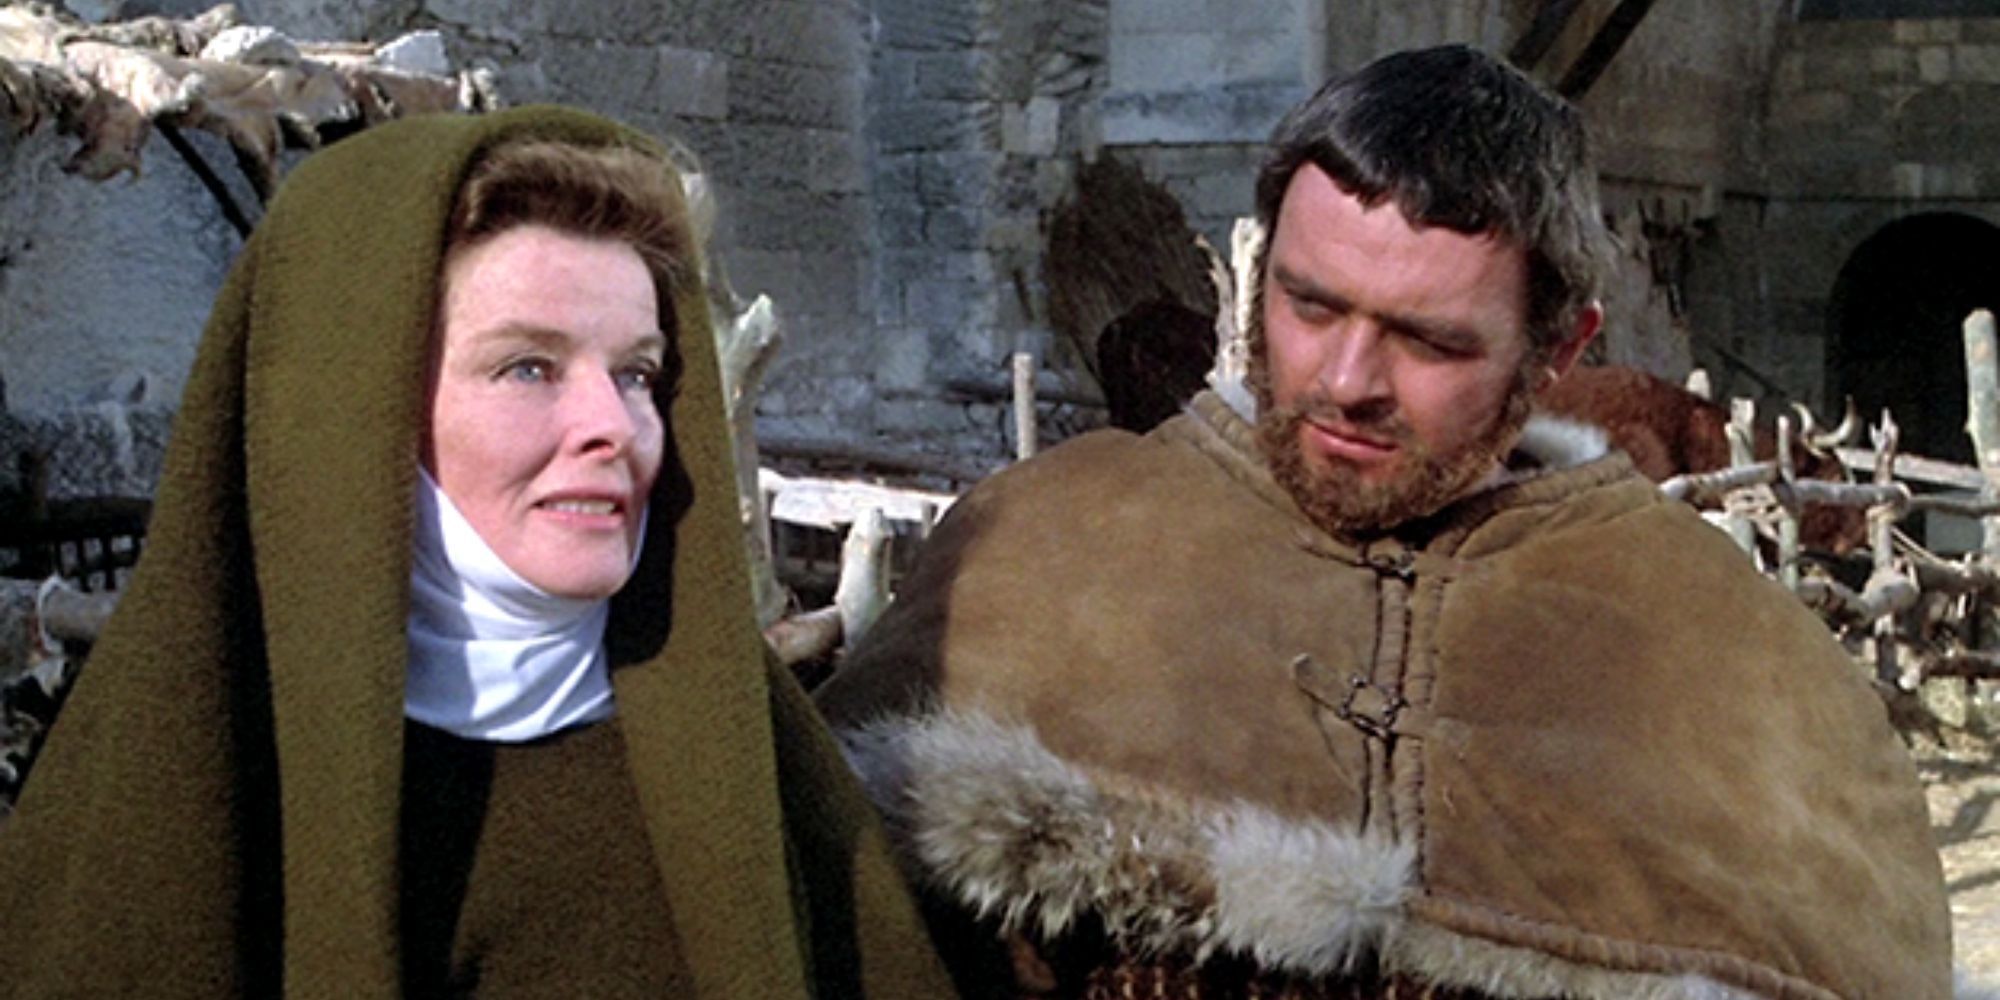 Katharine Hepburn standing next to Anthony Hopkins talking as he looks at her in The Lion in Winter